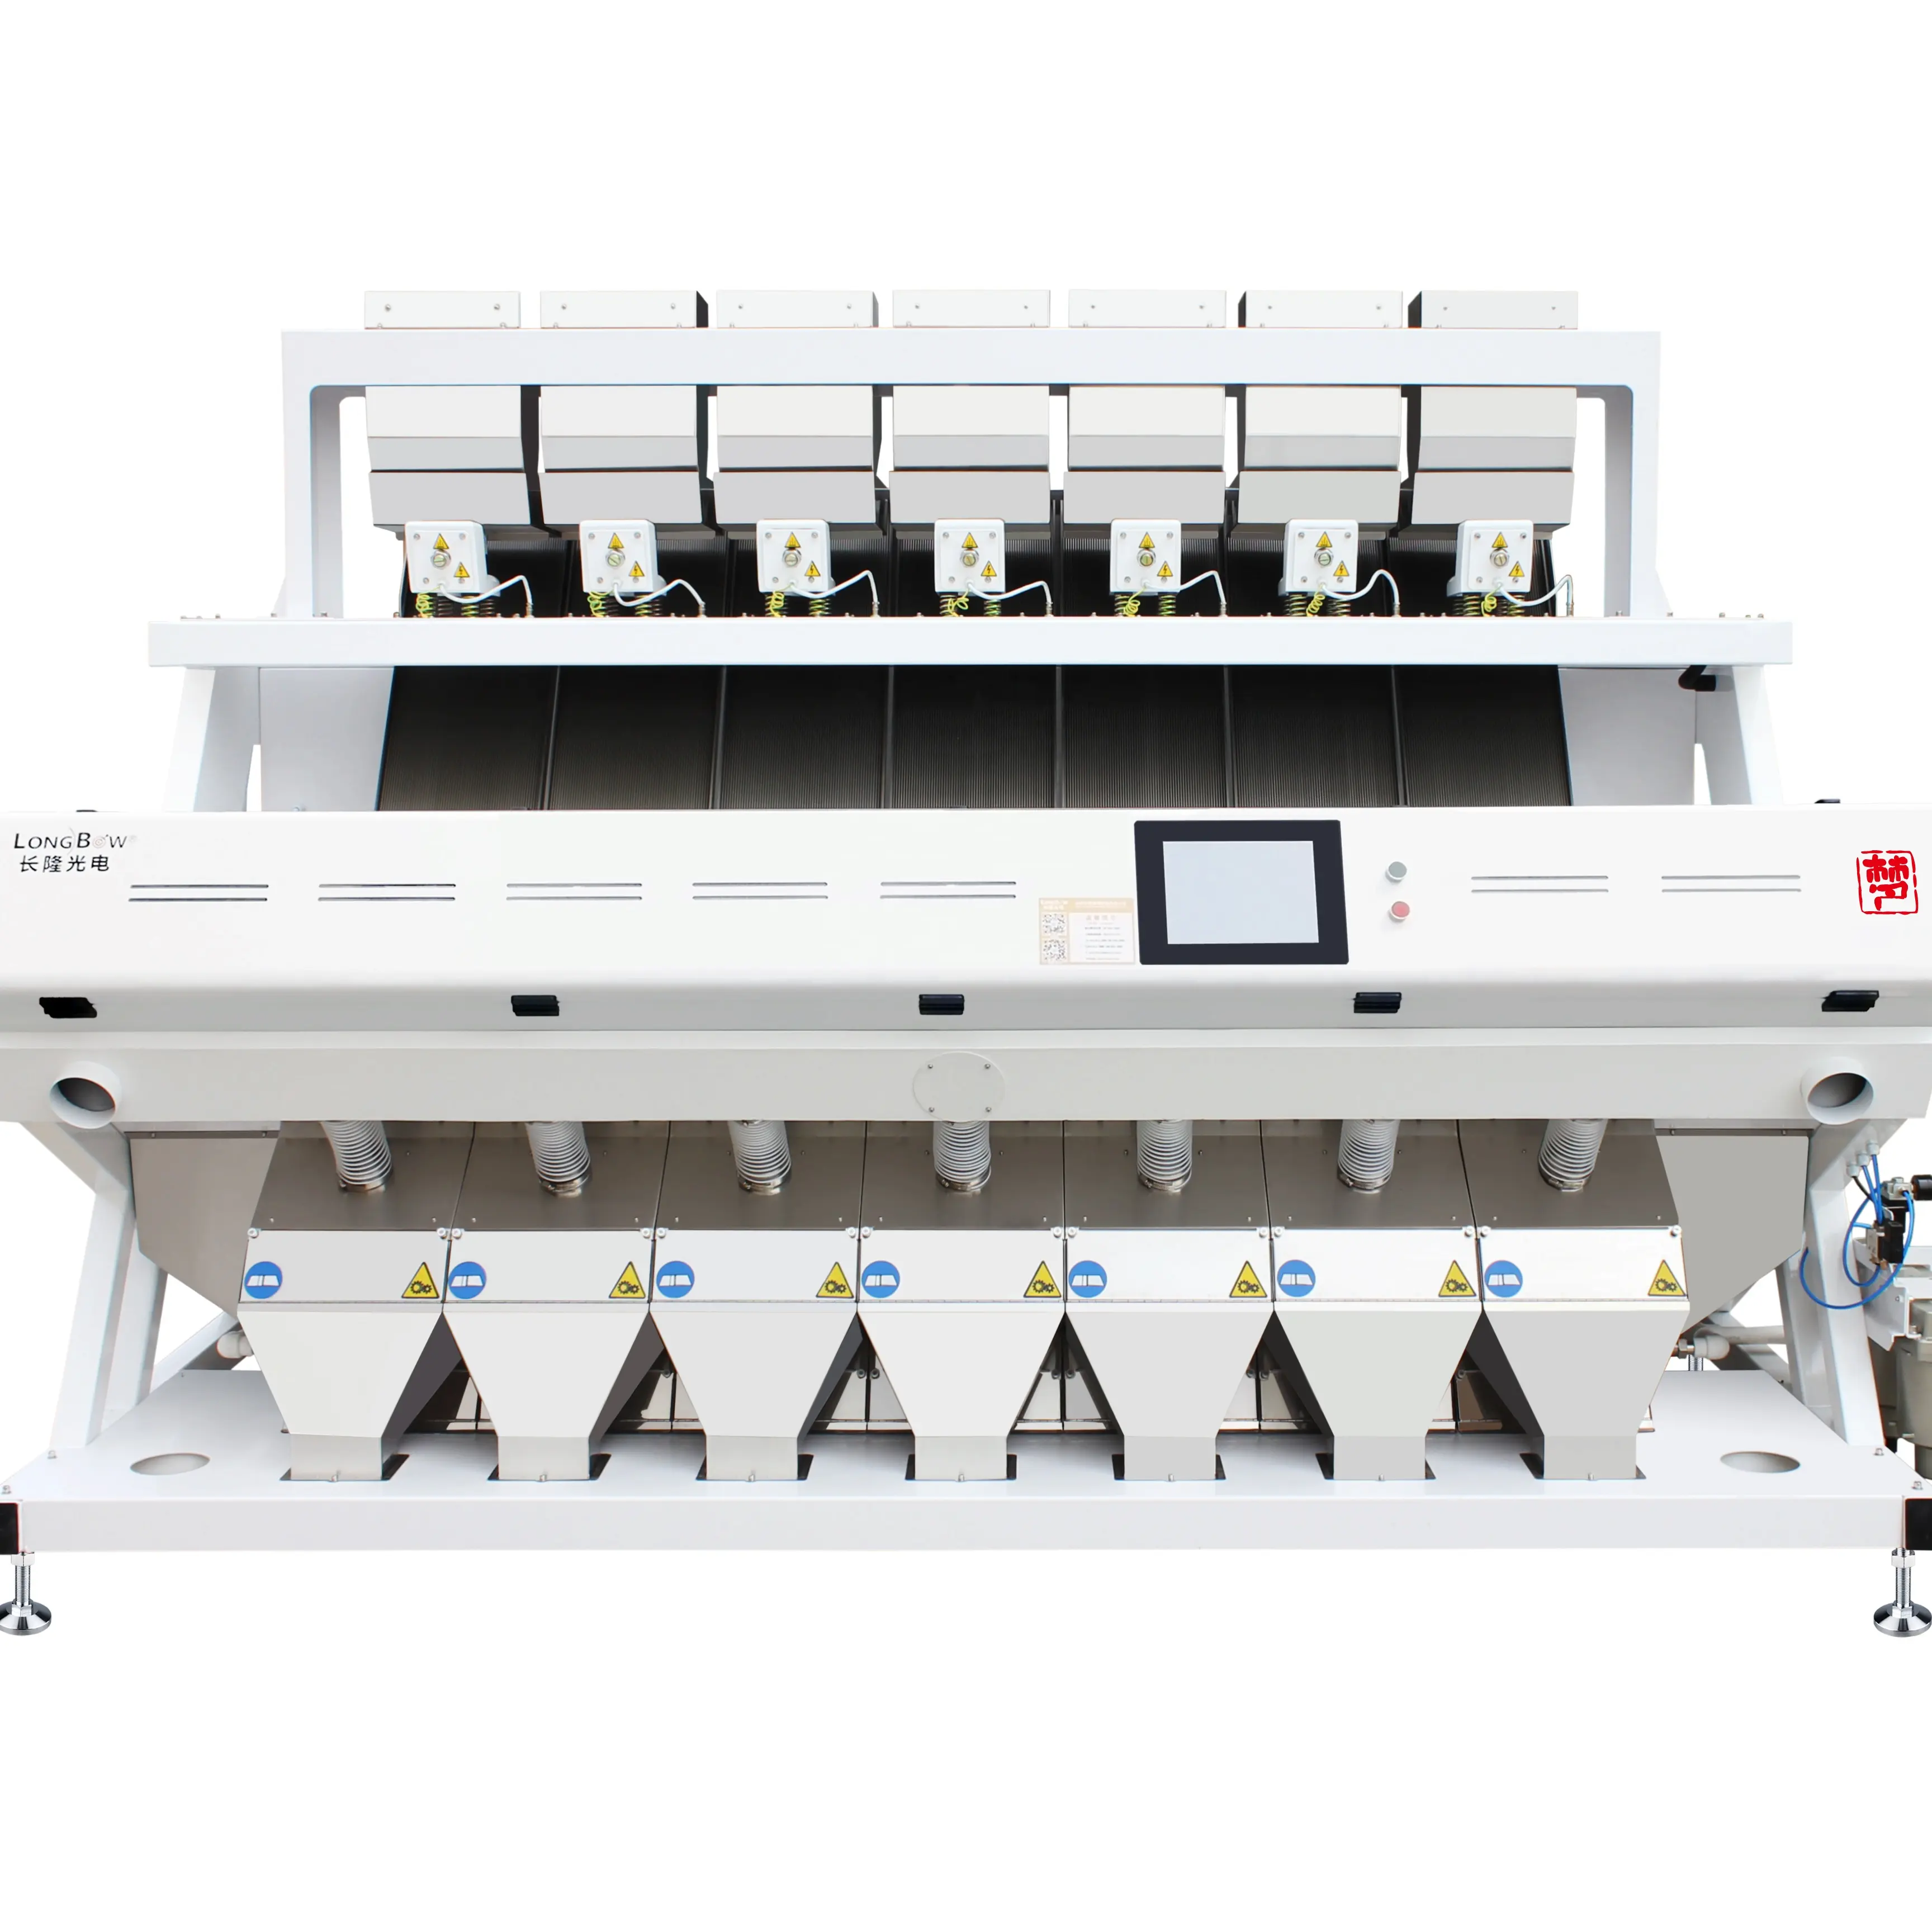 WIFI Automatic COLOR SORTER Rice Sorting Machine Factory price Bangladesh Parboiled Rice Sorter Philippines